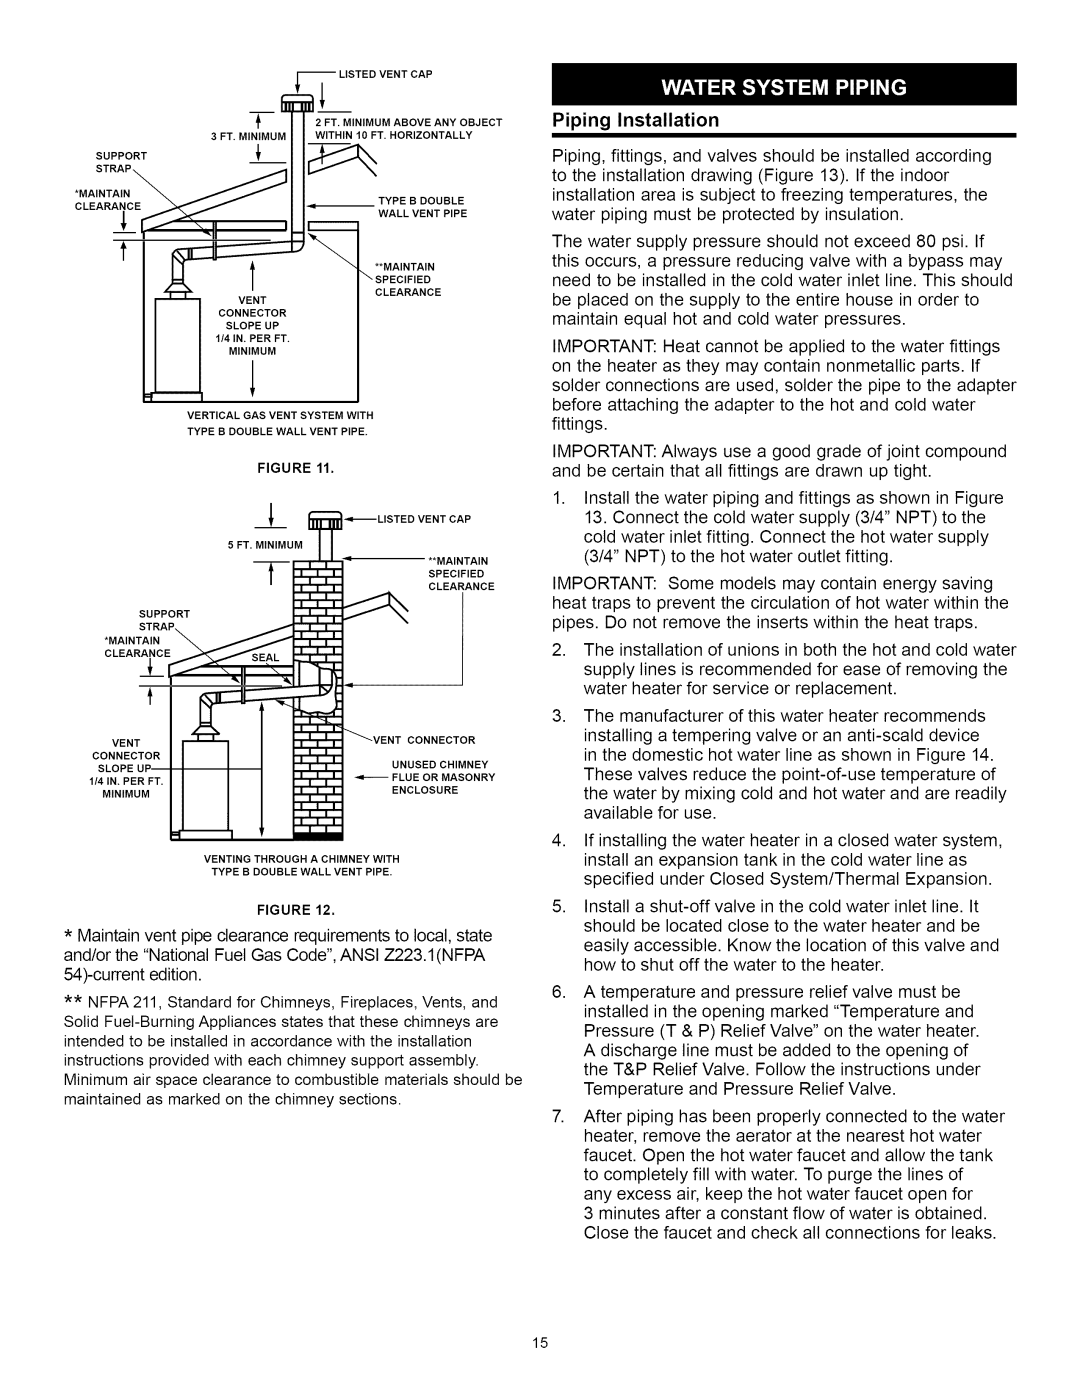 A.O. Smith Water Heater installation instructions Ma,Nta,N, Piping Installation 